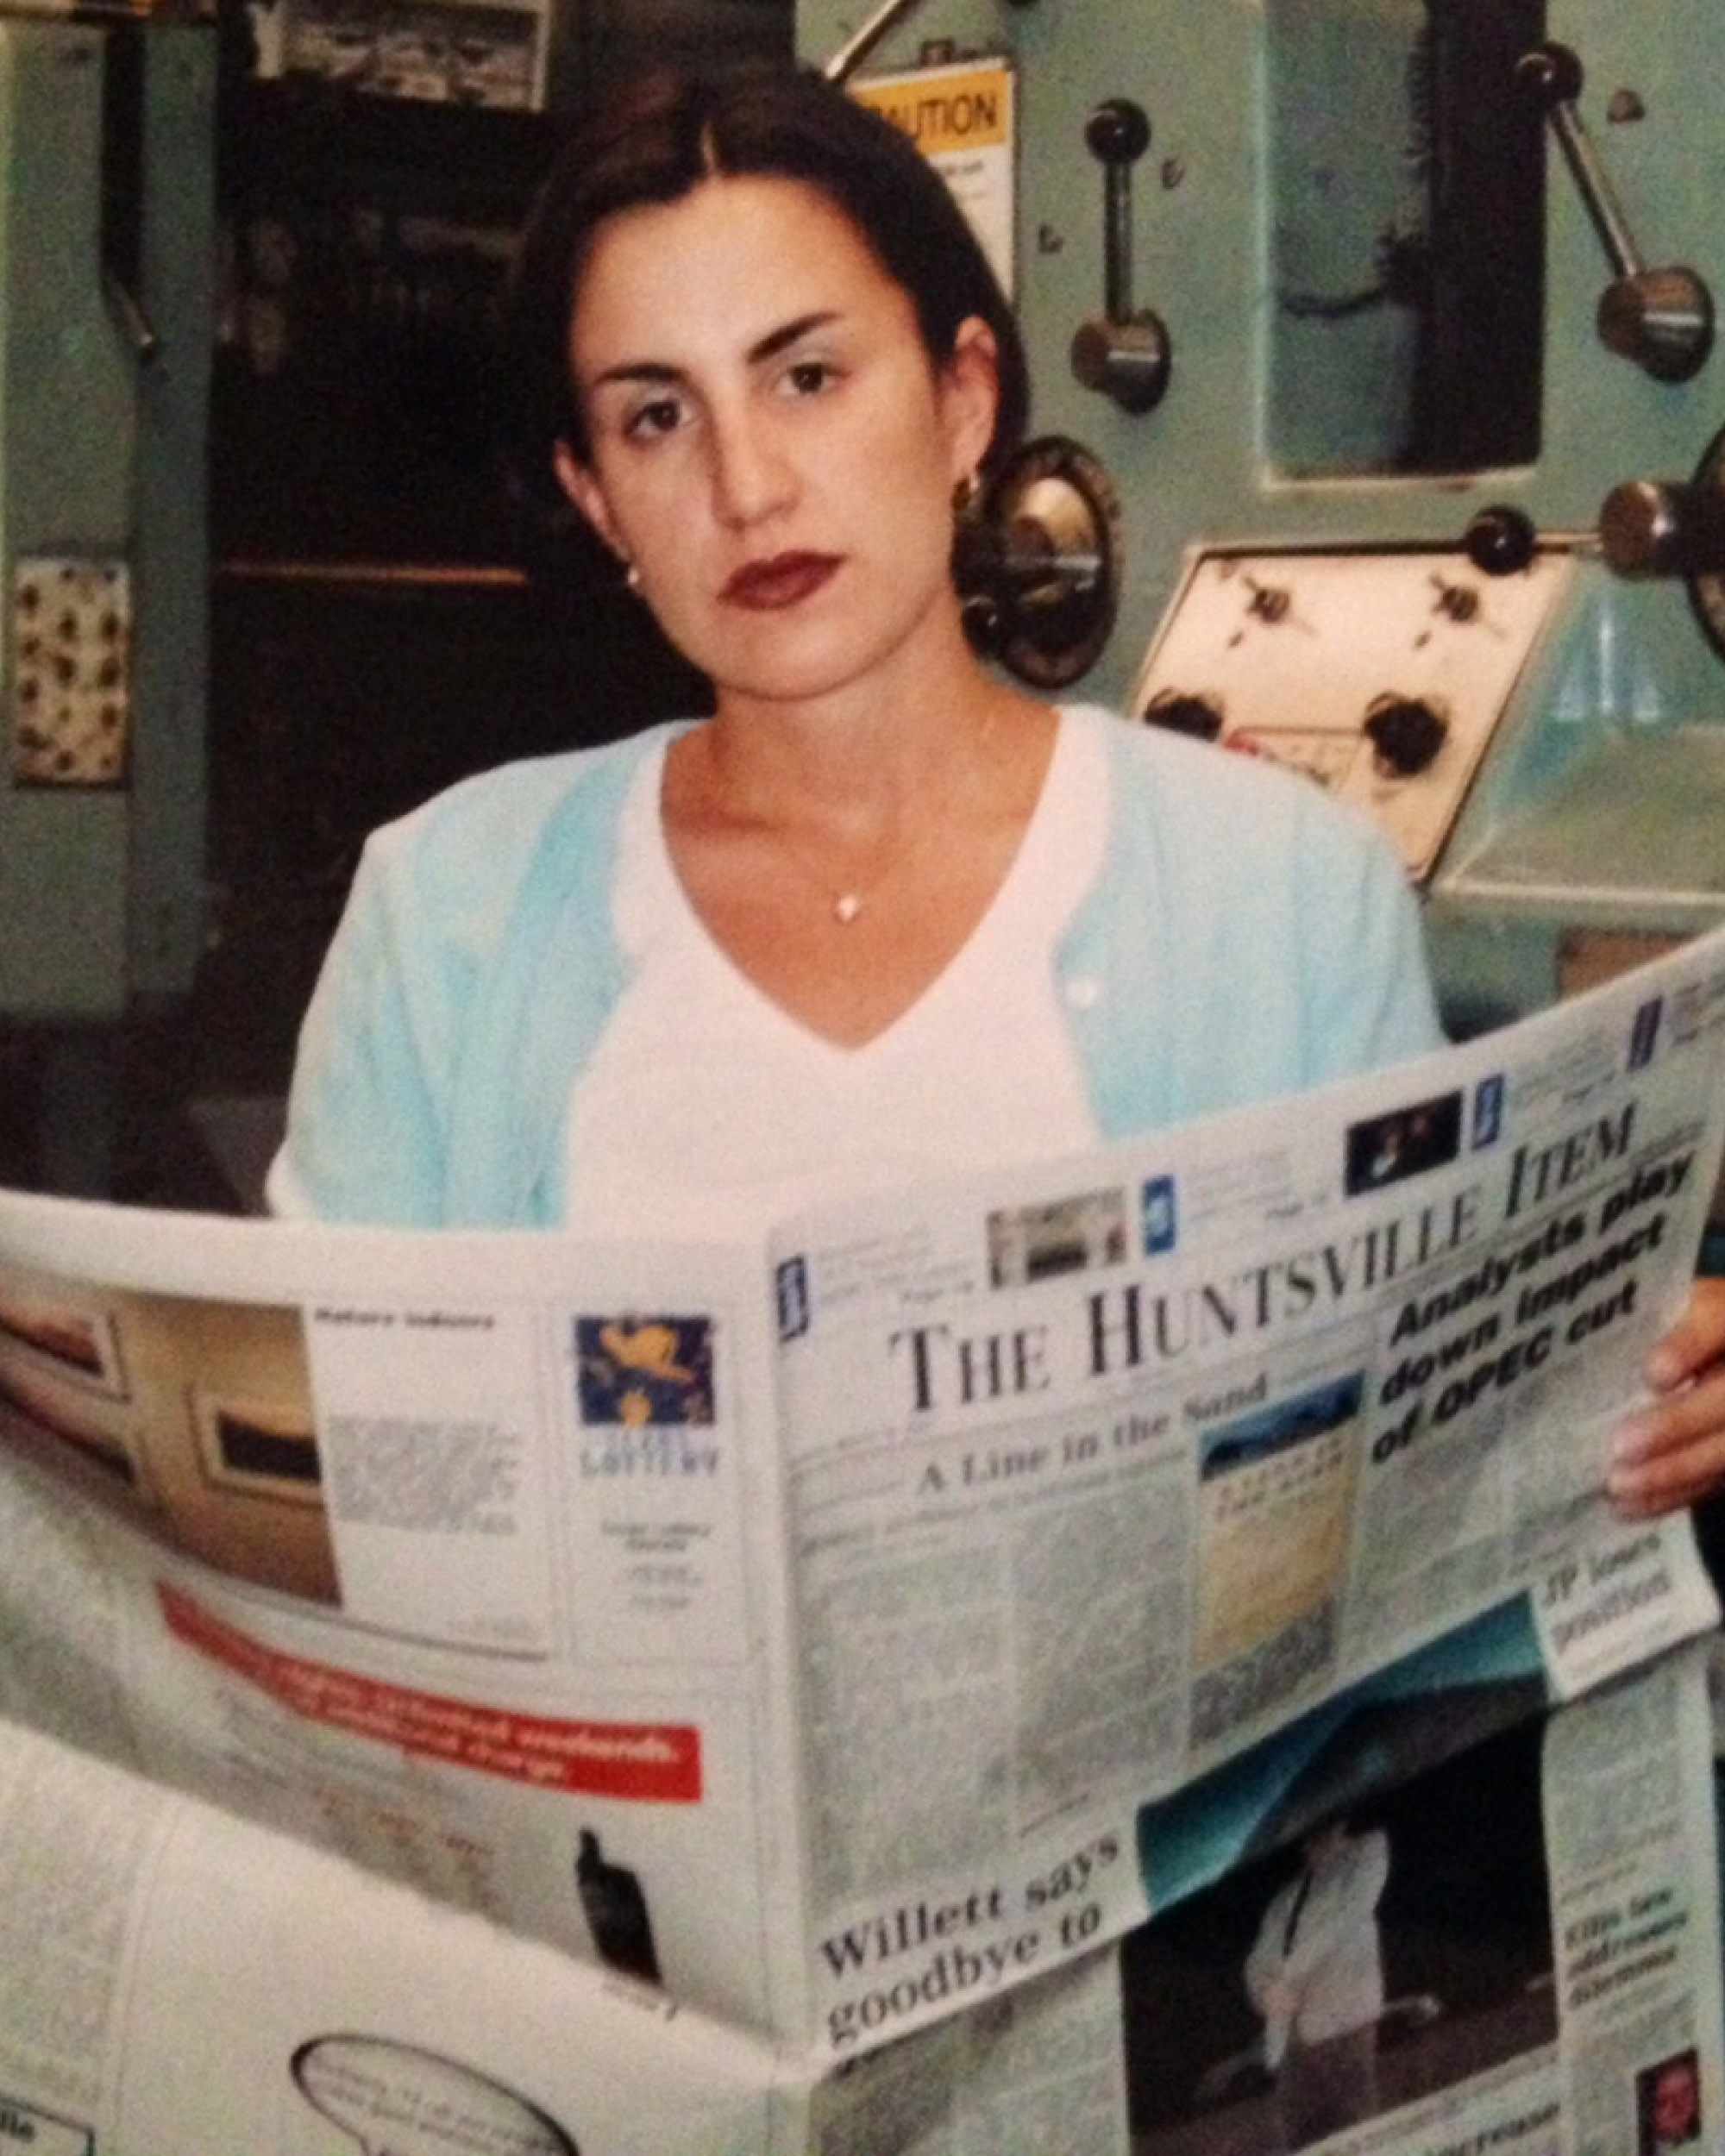 Michelle during her time as a reporter for The Huntsville Item.